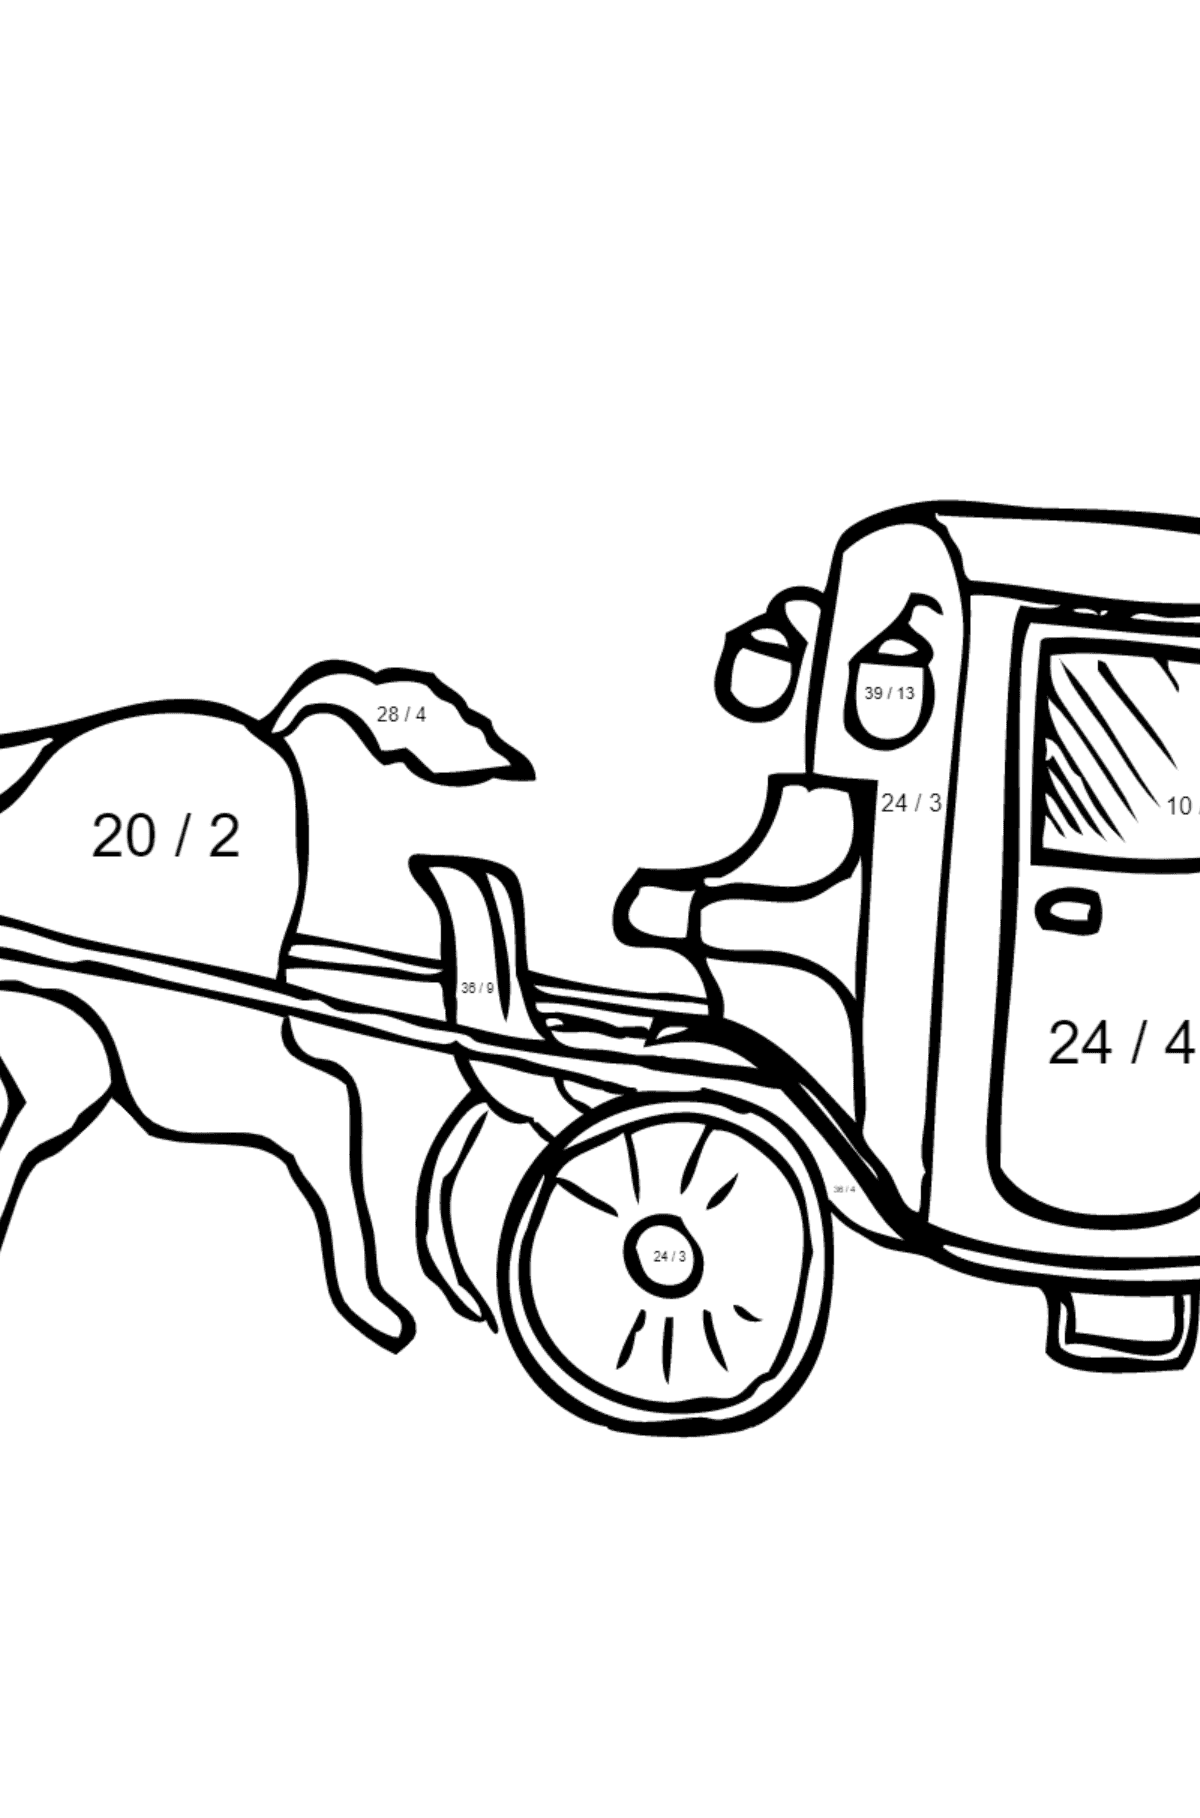 Coloring Page - A Cab - Math Coloring - Division for Kids